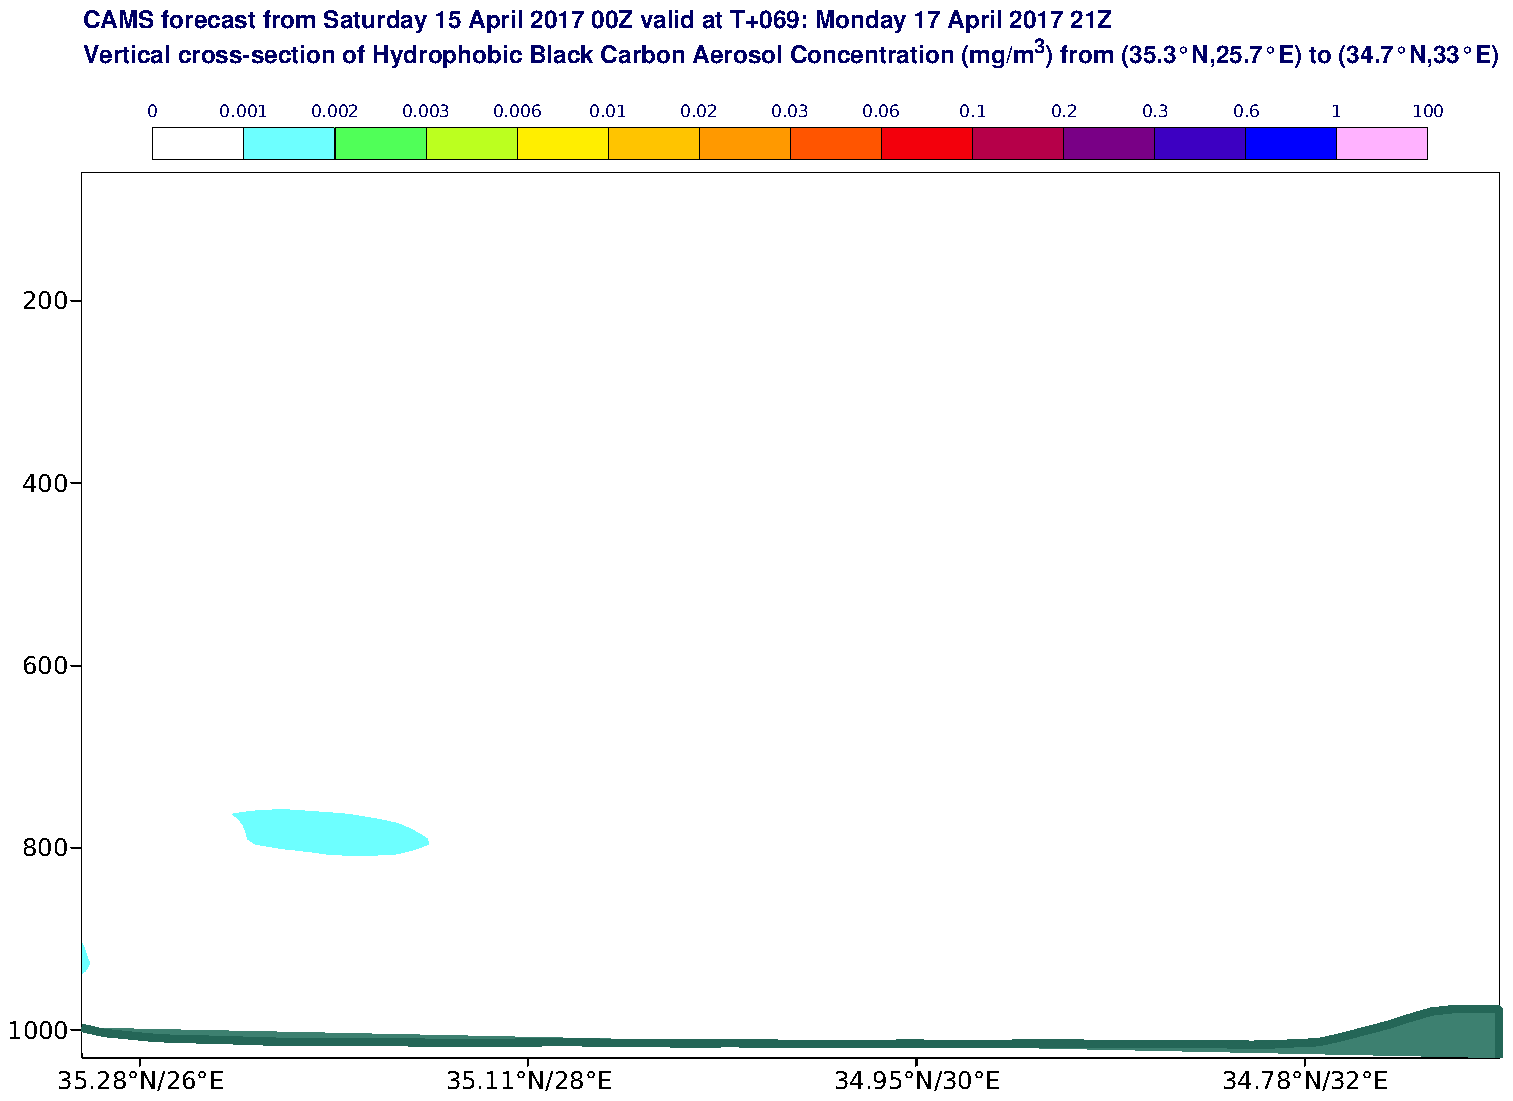 Vertical cross-section of Hydrophobic Black Carbon Aerosol Concentration (mg/m3) valid at T69 - 2017-04-17 21:00